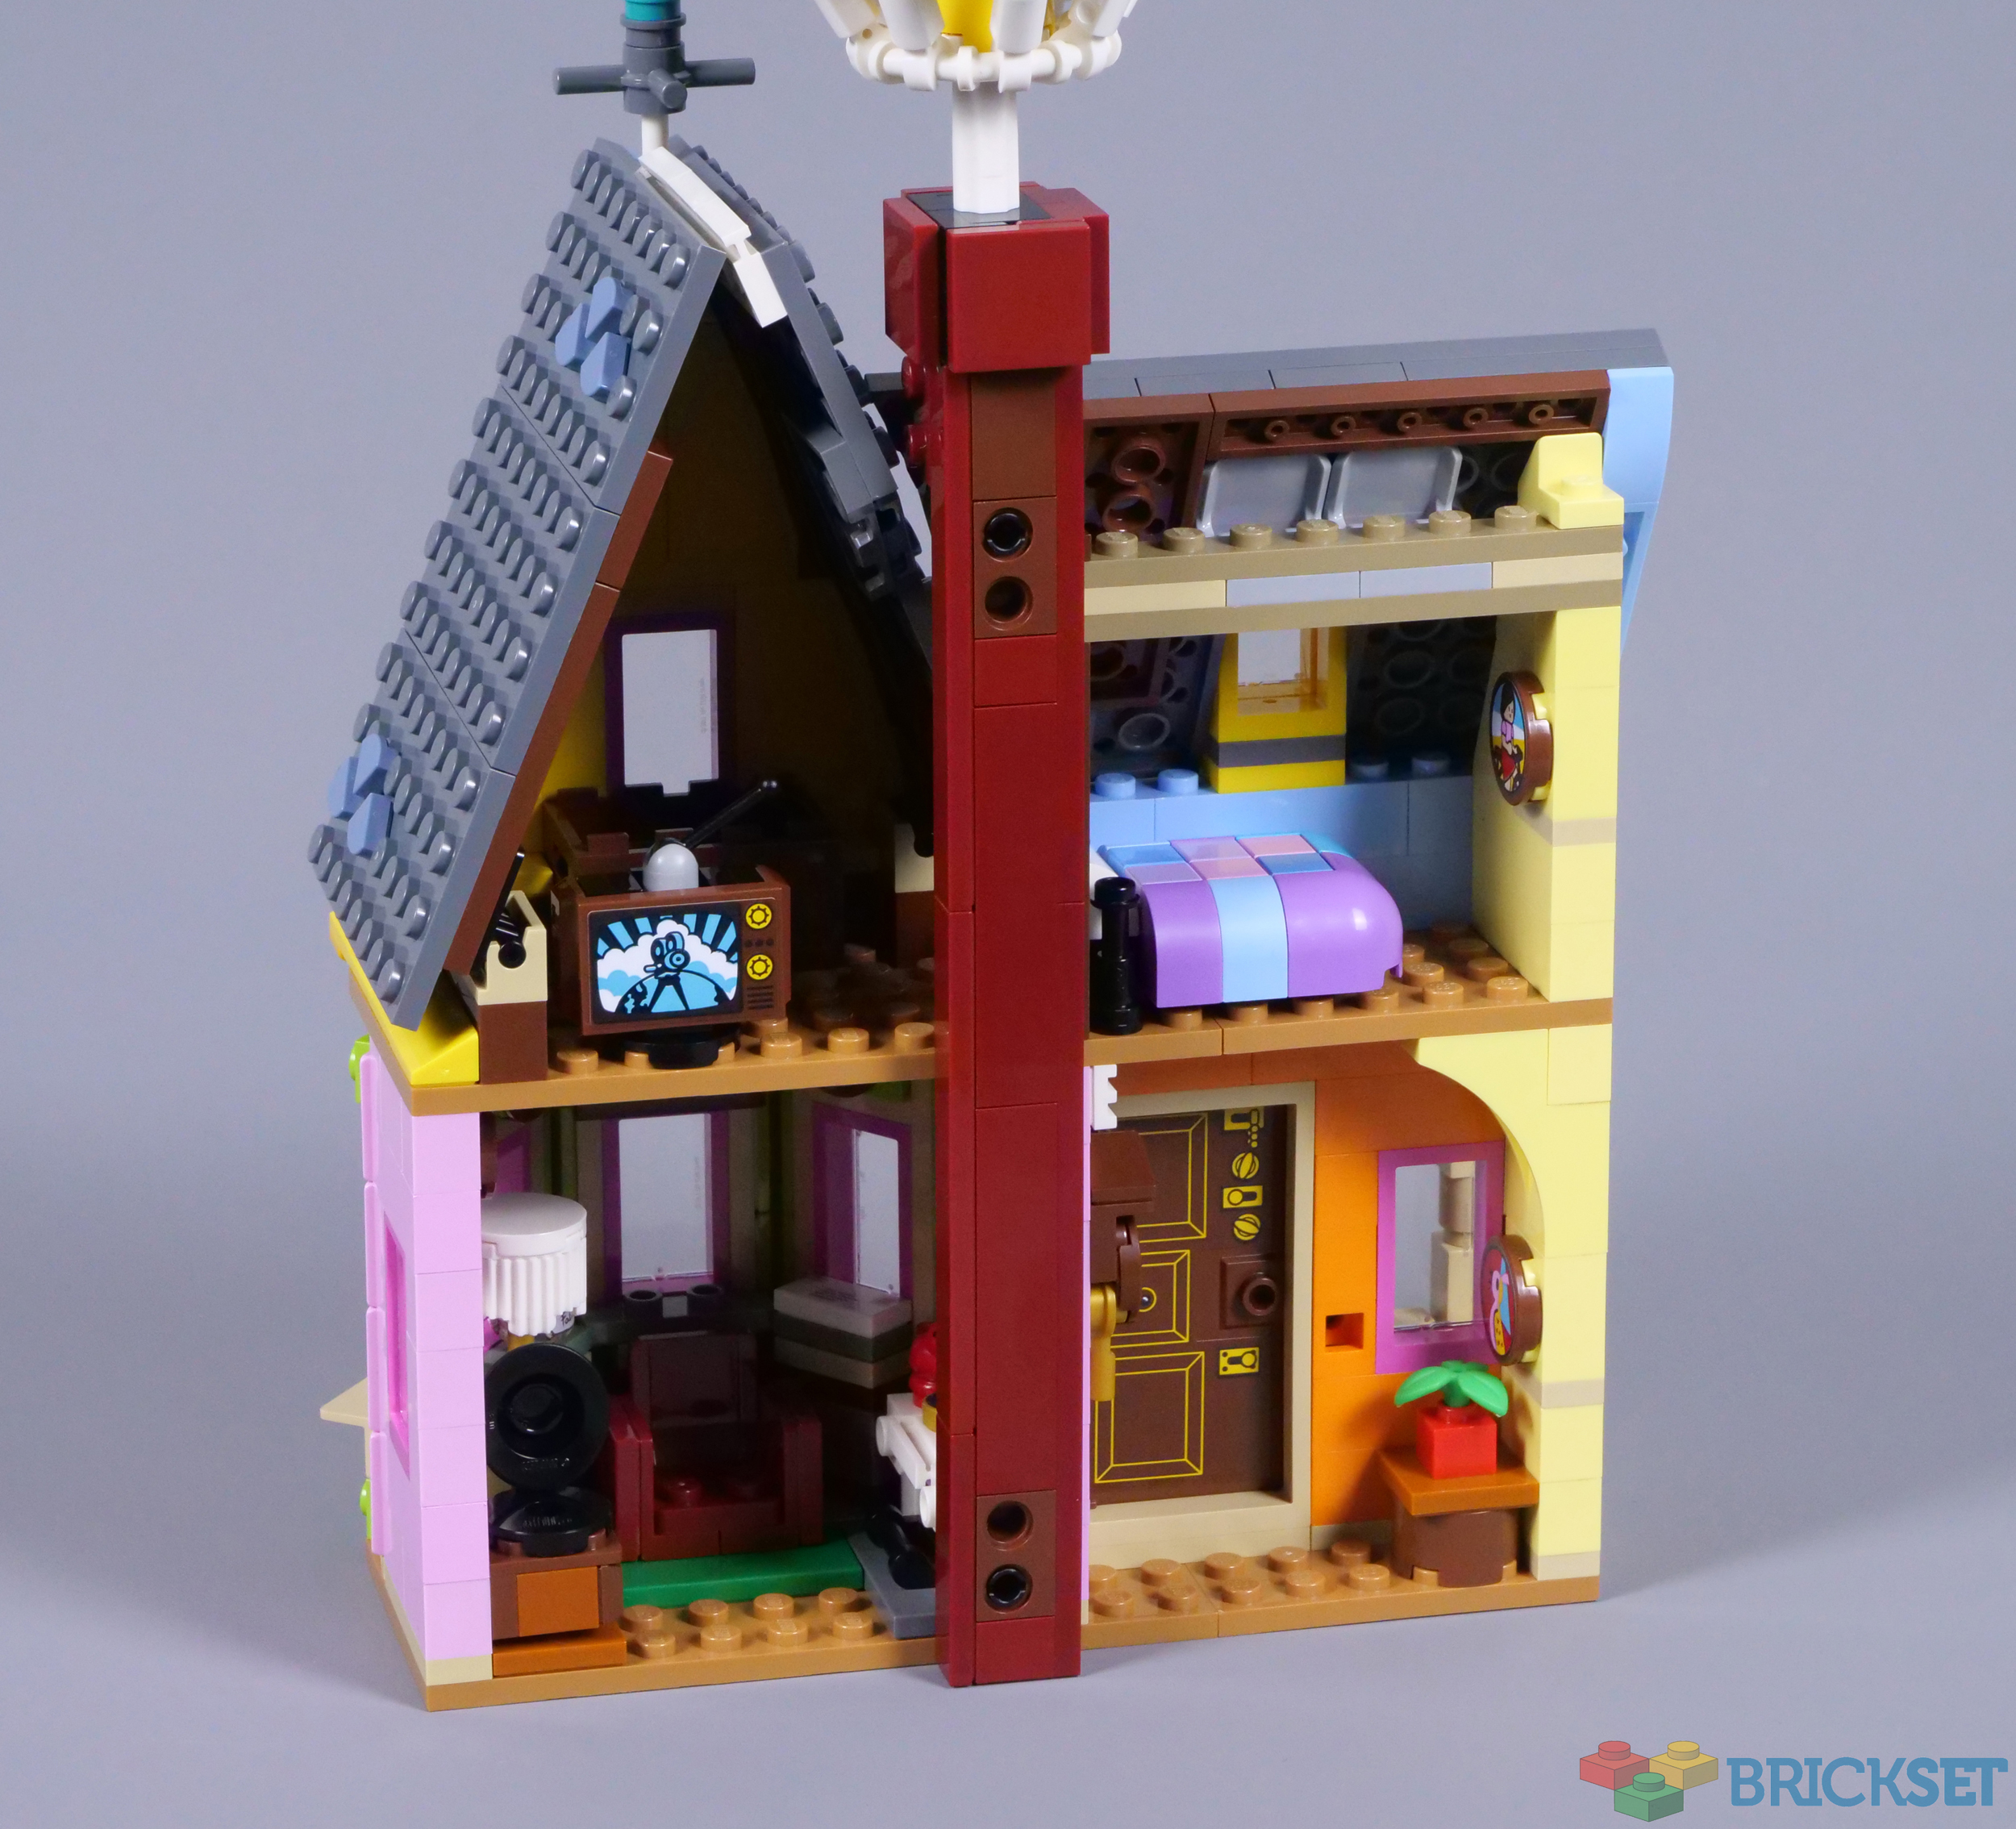 LEGO's Up House Is Both Charming And Affordable